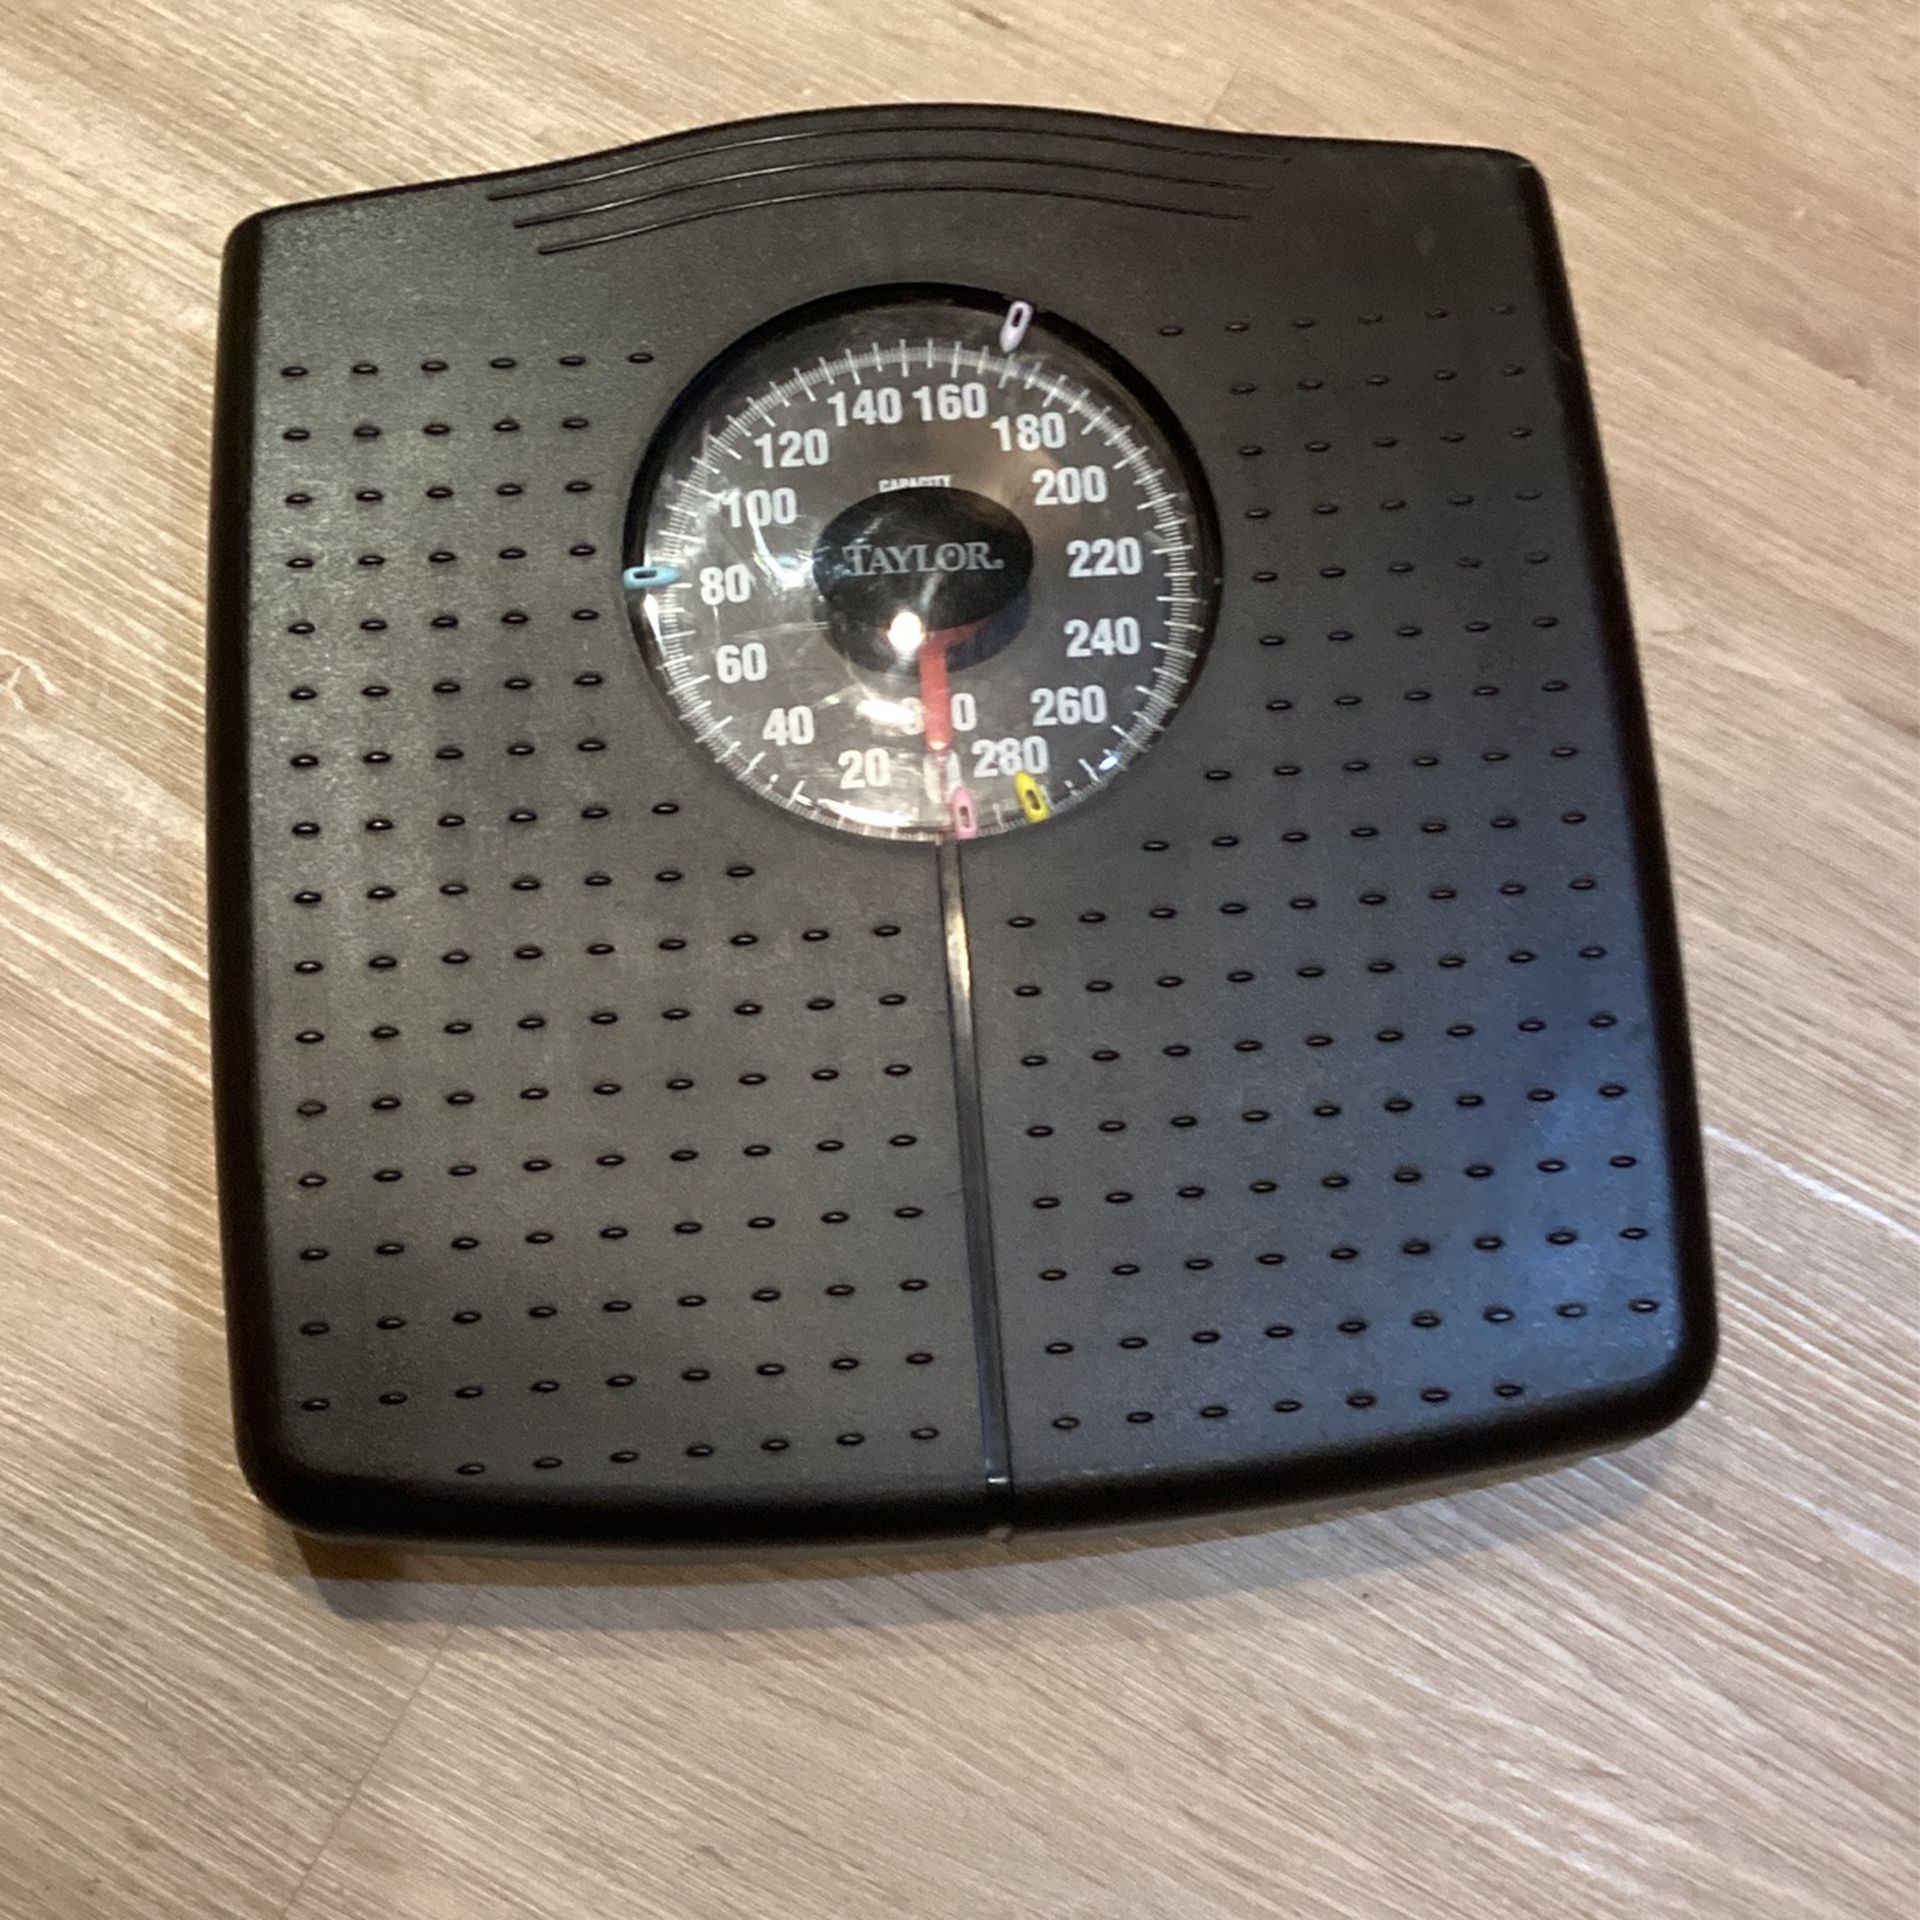 Scale - Taylor Up Scale analog Bathroom Scale. Perfectly Calibrated And Easily Adjusted If Needed At Any Time - Up To 300 Lbs.